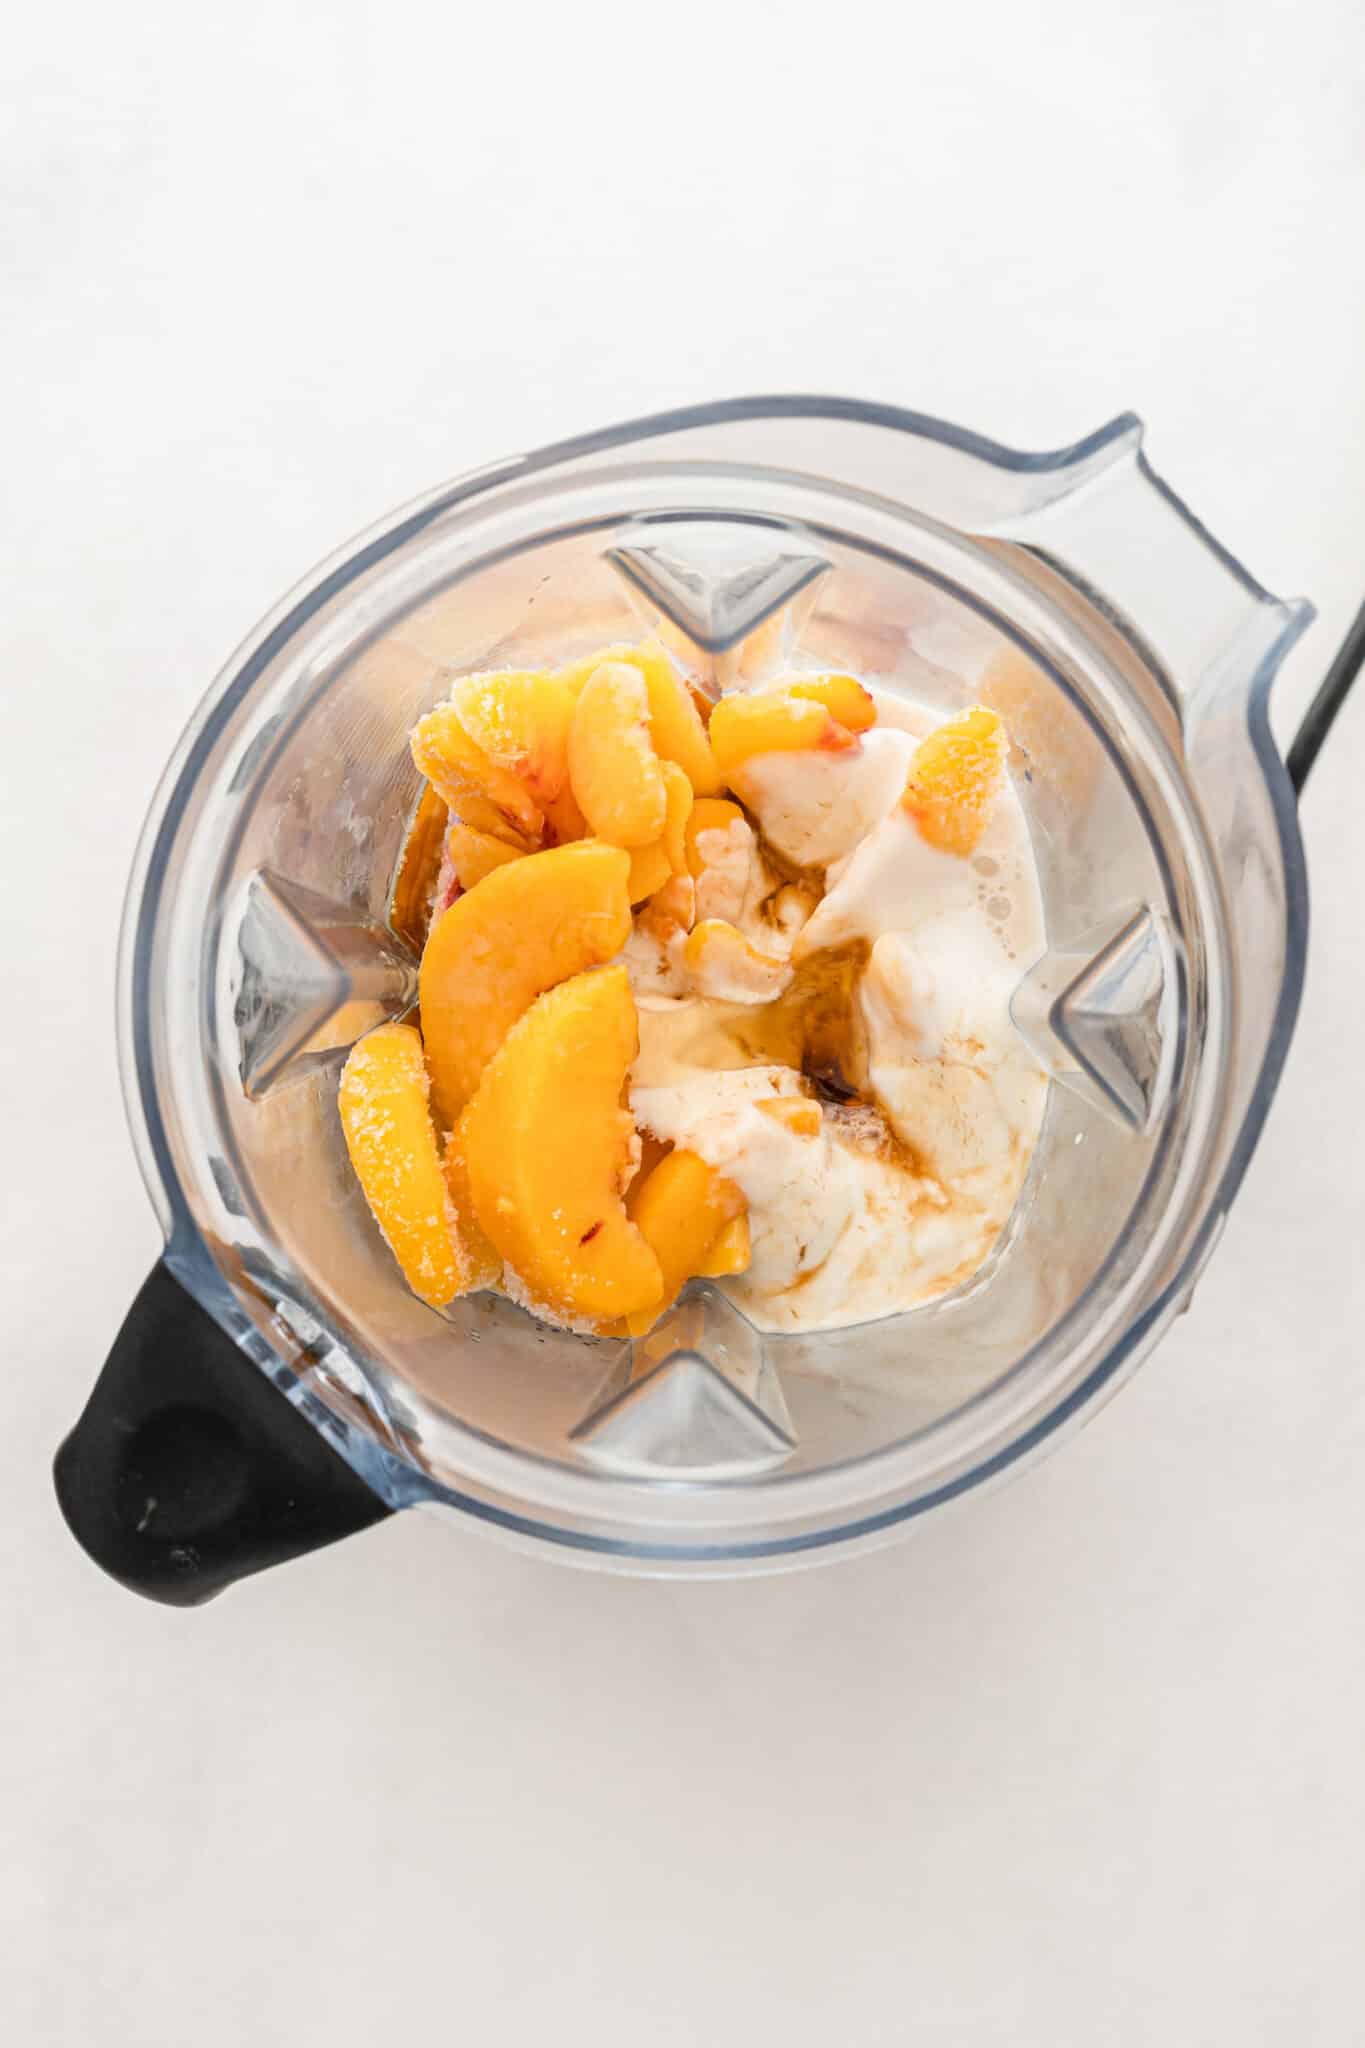 Ingredients for a peach banana smoothie in the jar of a blender.